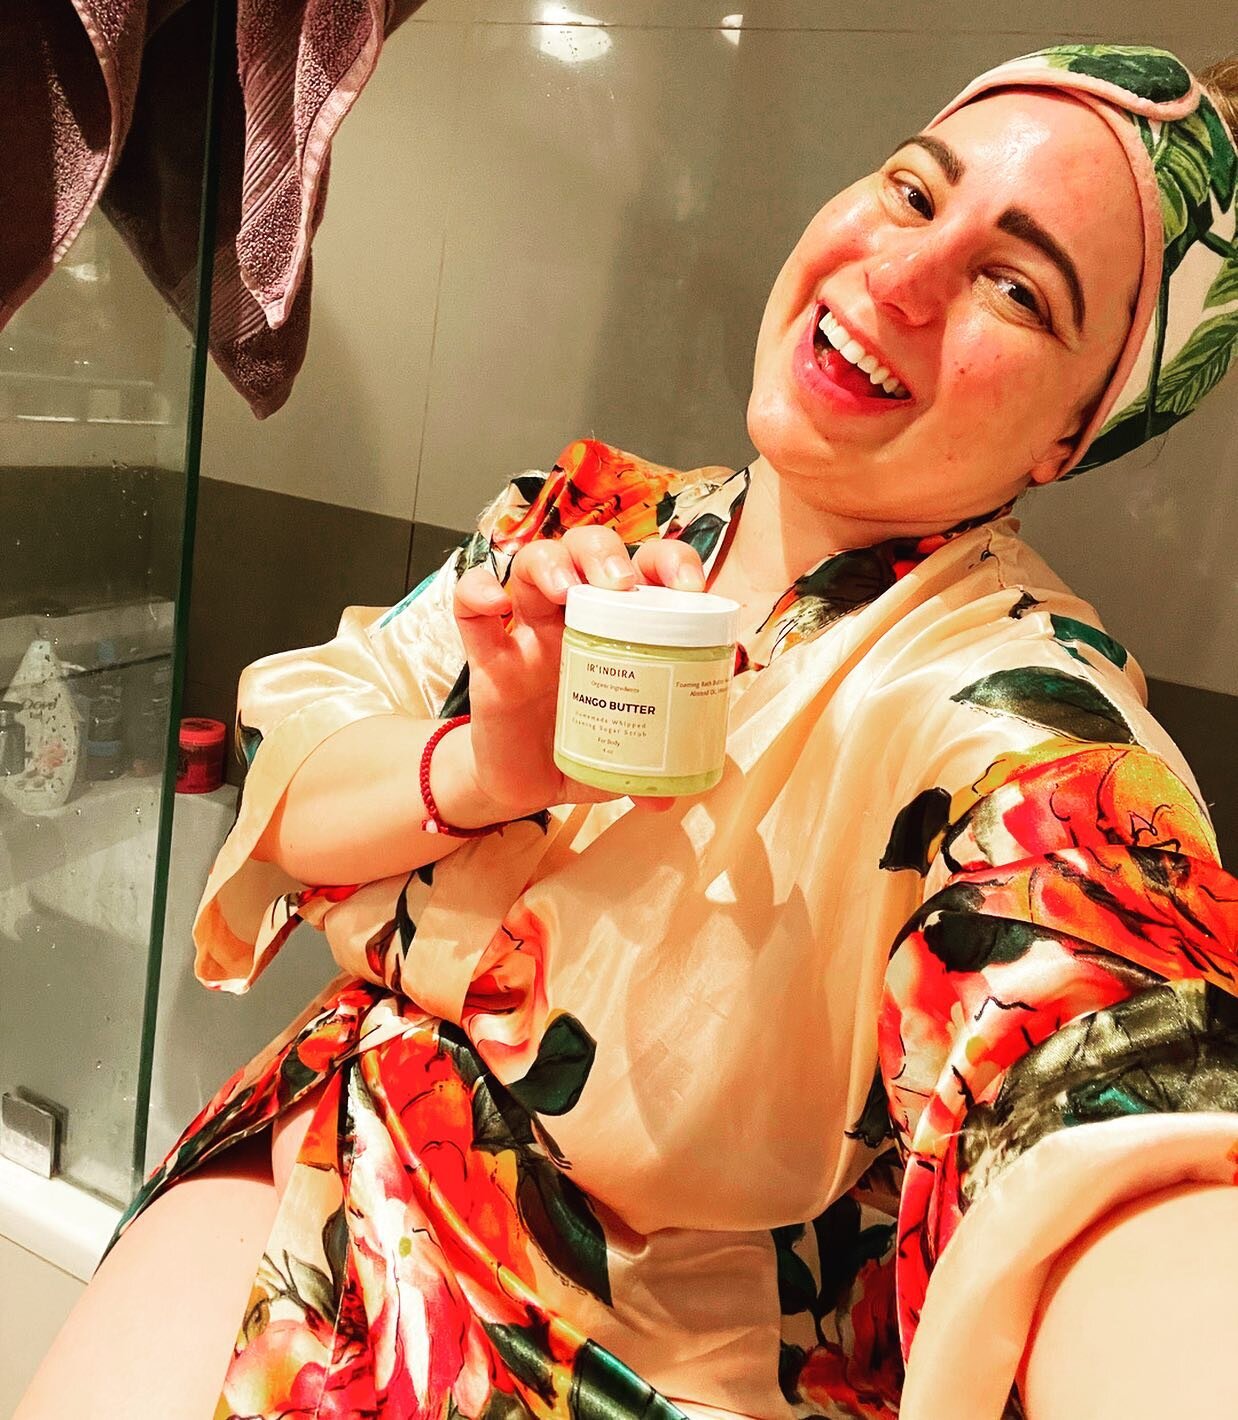 #sponsored My Secret to Soft Beautiful Skin all Year Long... IR'INDIRA's Mango Butter Sugar Scrub - to exfoliate and remove the top layer of skin cells and impurities, dirt, and excess oils. Leaving my skin smoother and more even! 
#Skincare #Selfcar